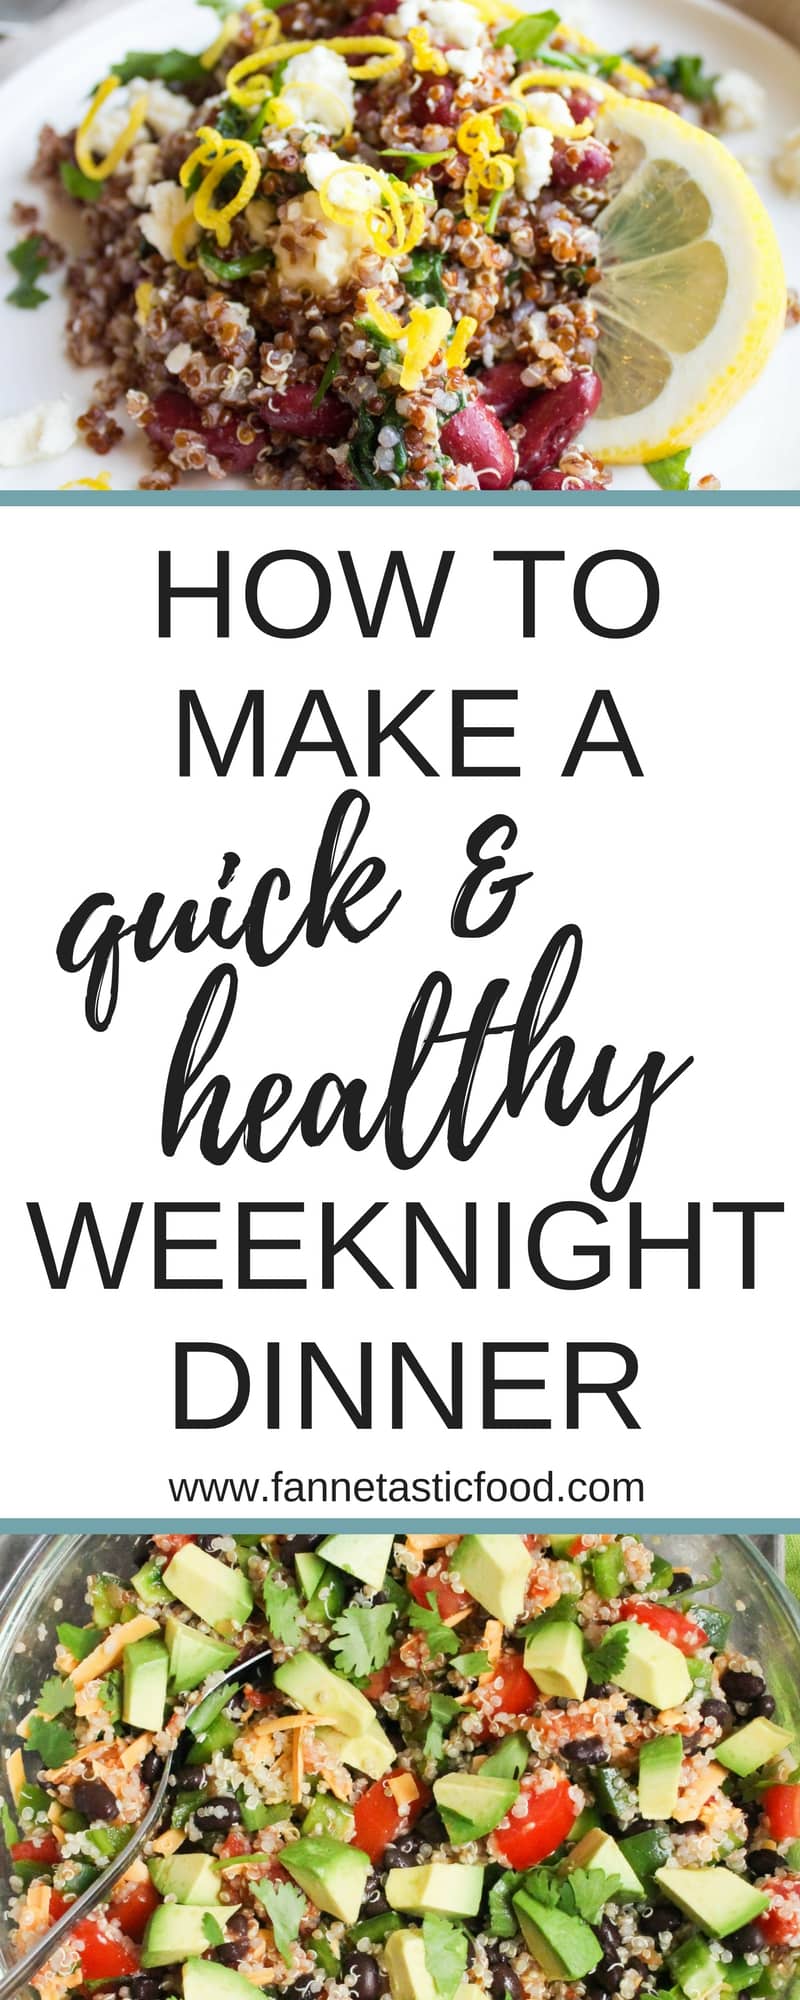 The last thing you want to think about after a long day at work is what to make for dinner - so here's your formula for a *super* quick and healthy weeknight dinner, no matter what you have in your fridge!